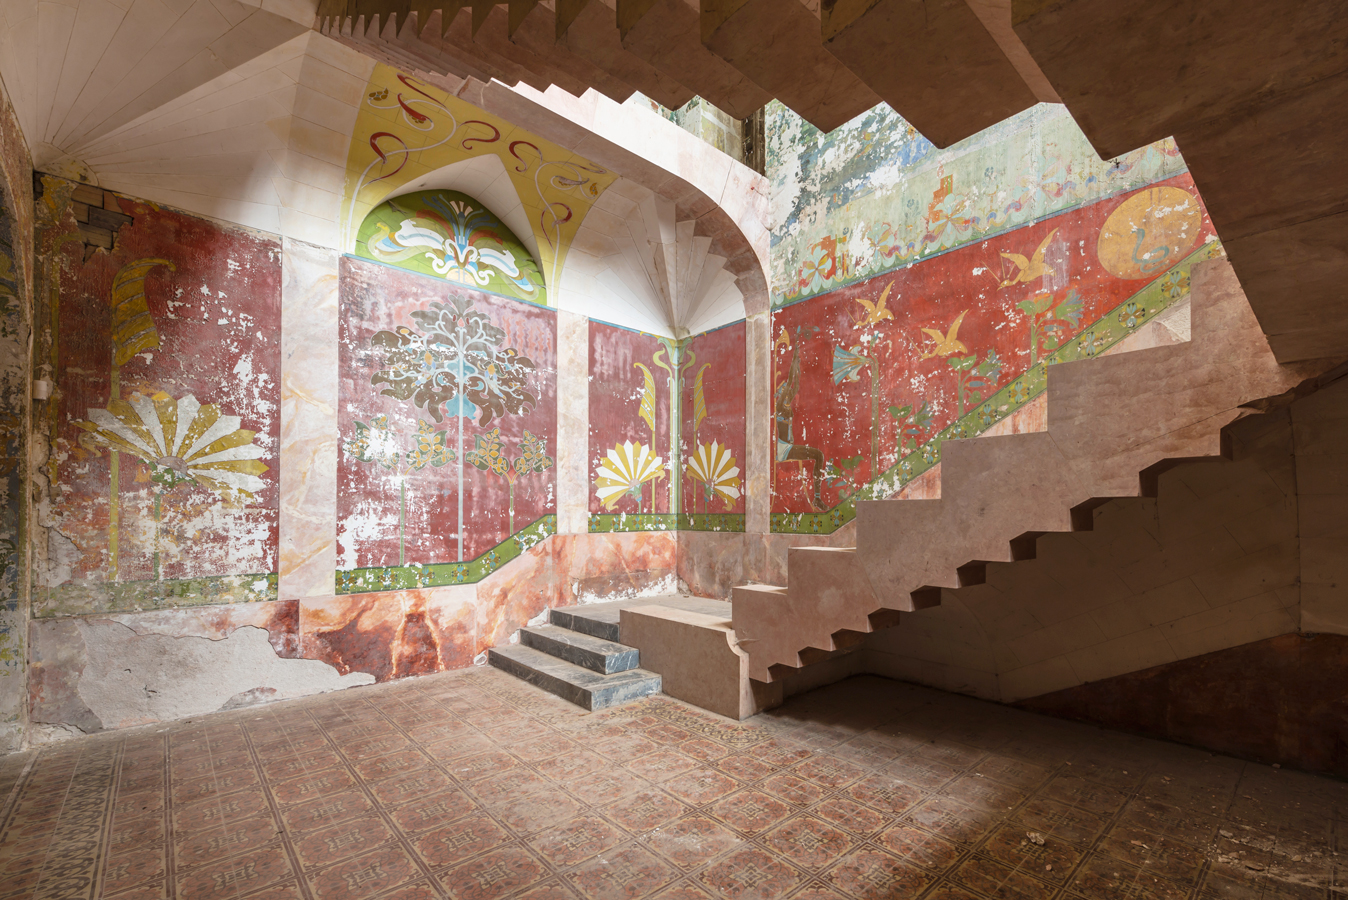 Stills from "The Imaginary Museum," the new photography series from Romain Veillon that shines a light on Europe's abandoned murals. 